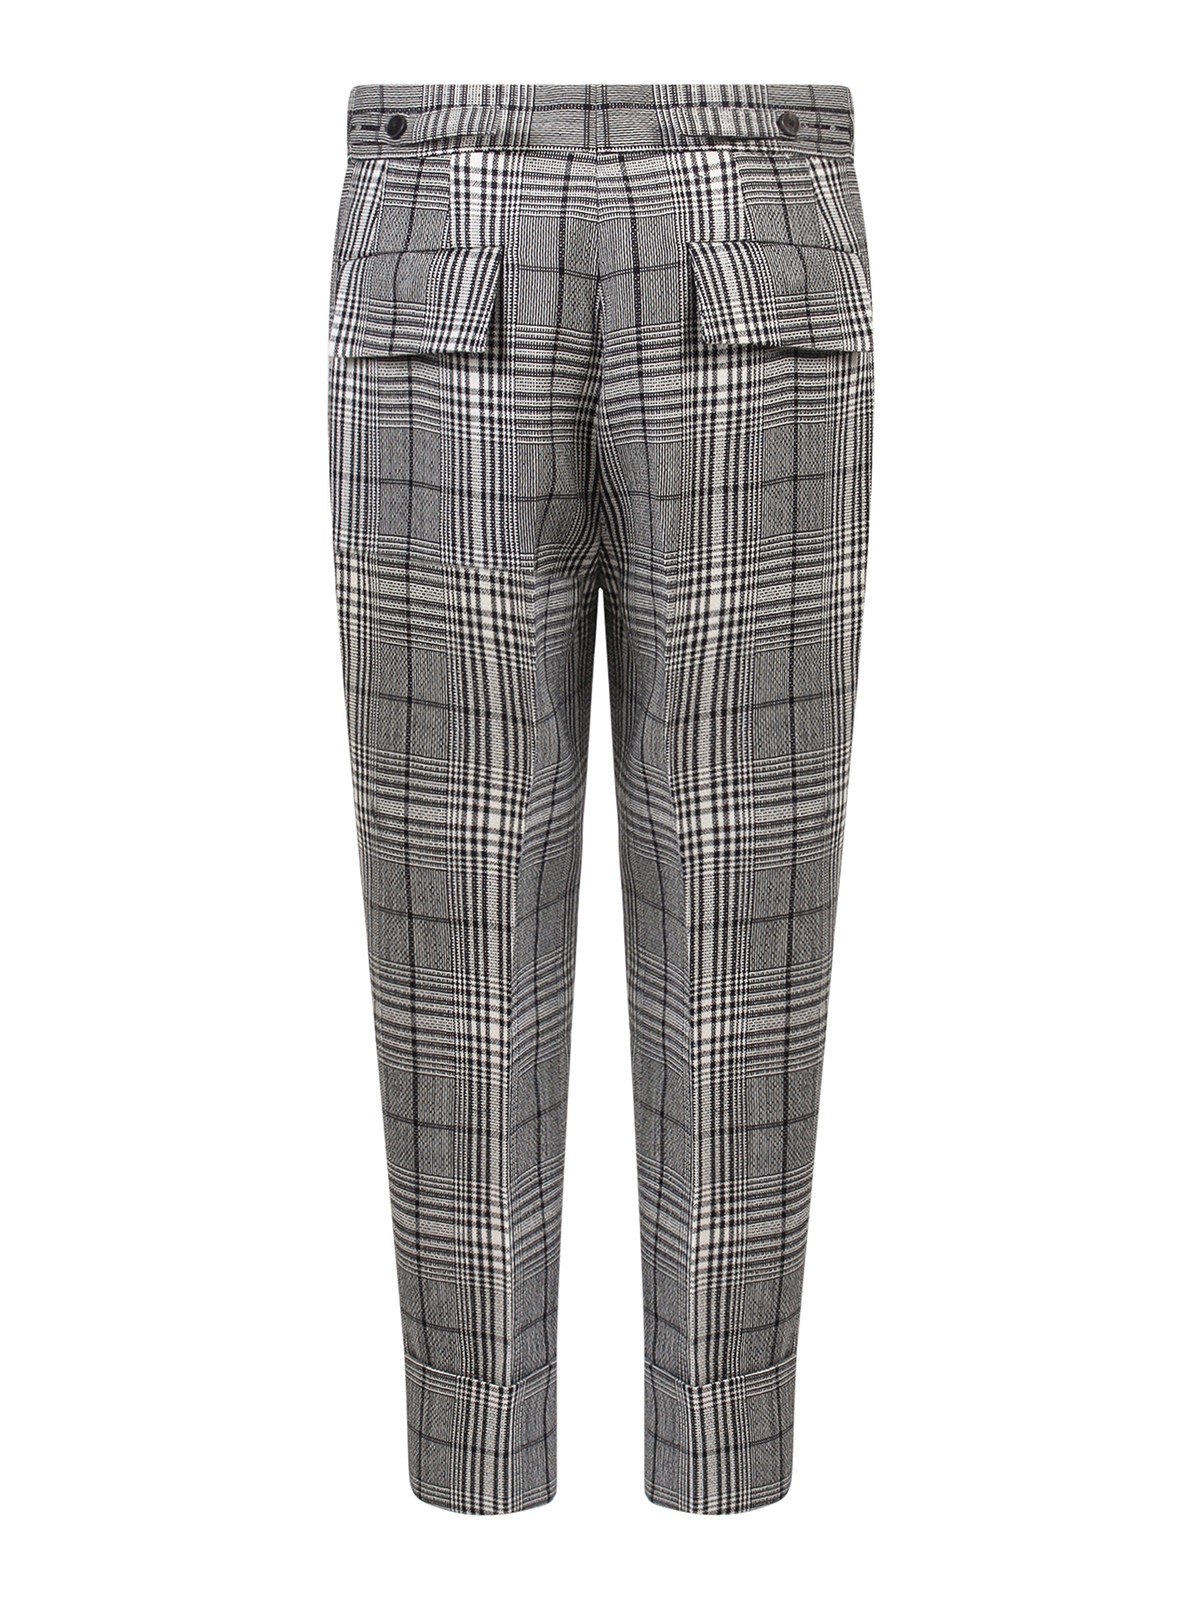 Dobell Navy Prince of Wales Check Suit Trousers | Dobell